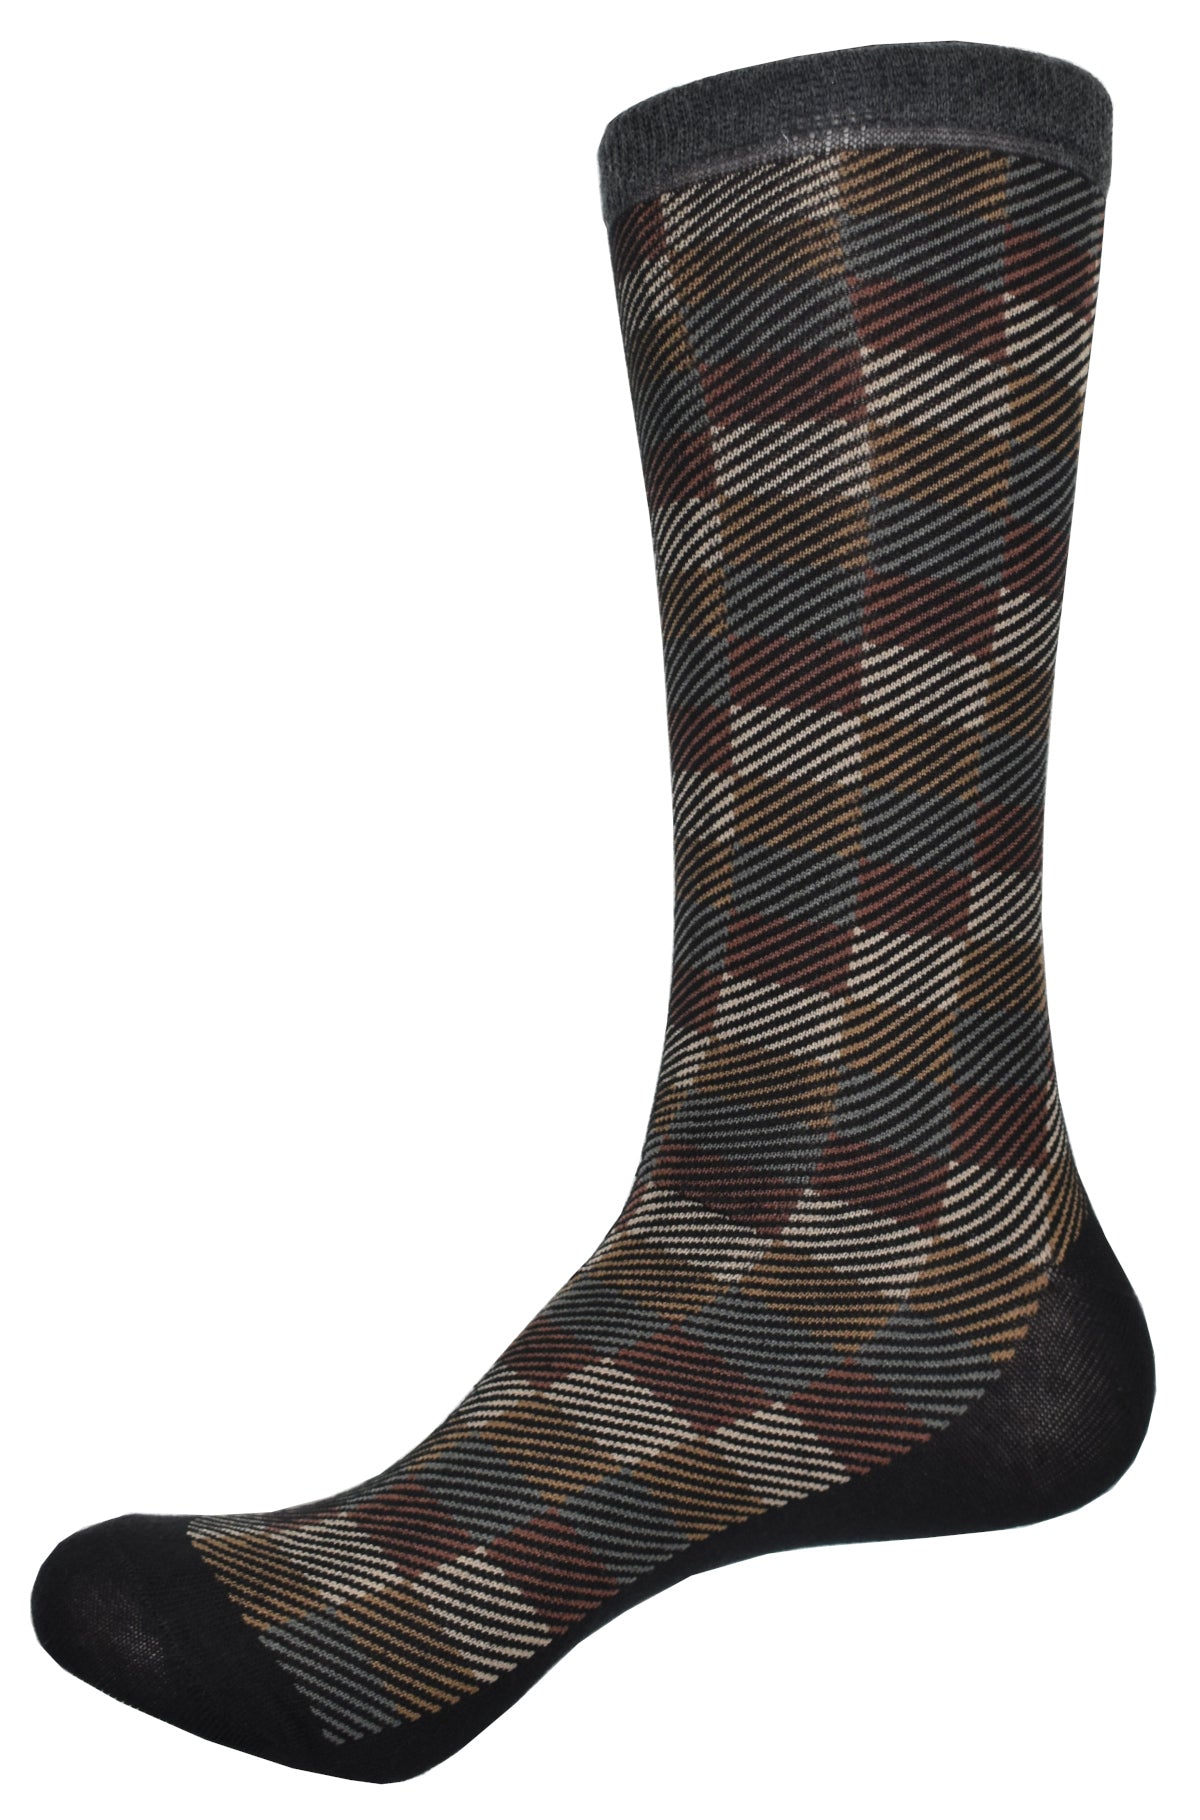 Experience ultimate comfort with ZJ315 Earth Rectangles Socks. Crafted from soft mercerized cotton in a calf high design, these luxury socks come in a warm tan, brown, mocha and touch of wine color palette for an elevated look. Marcello Socks.